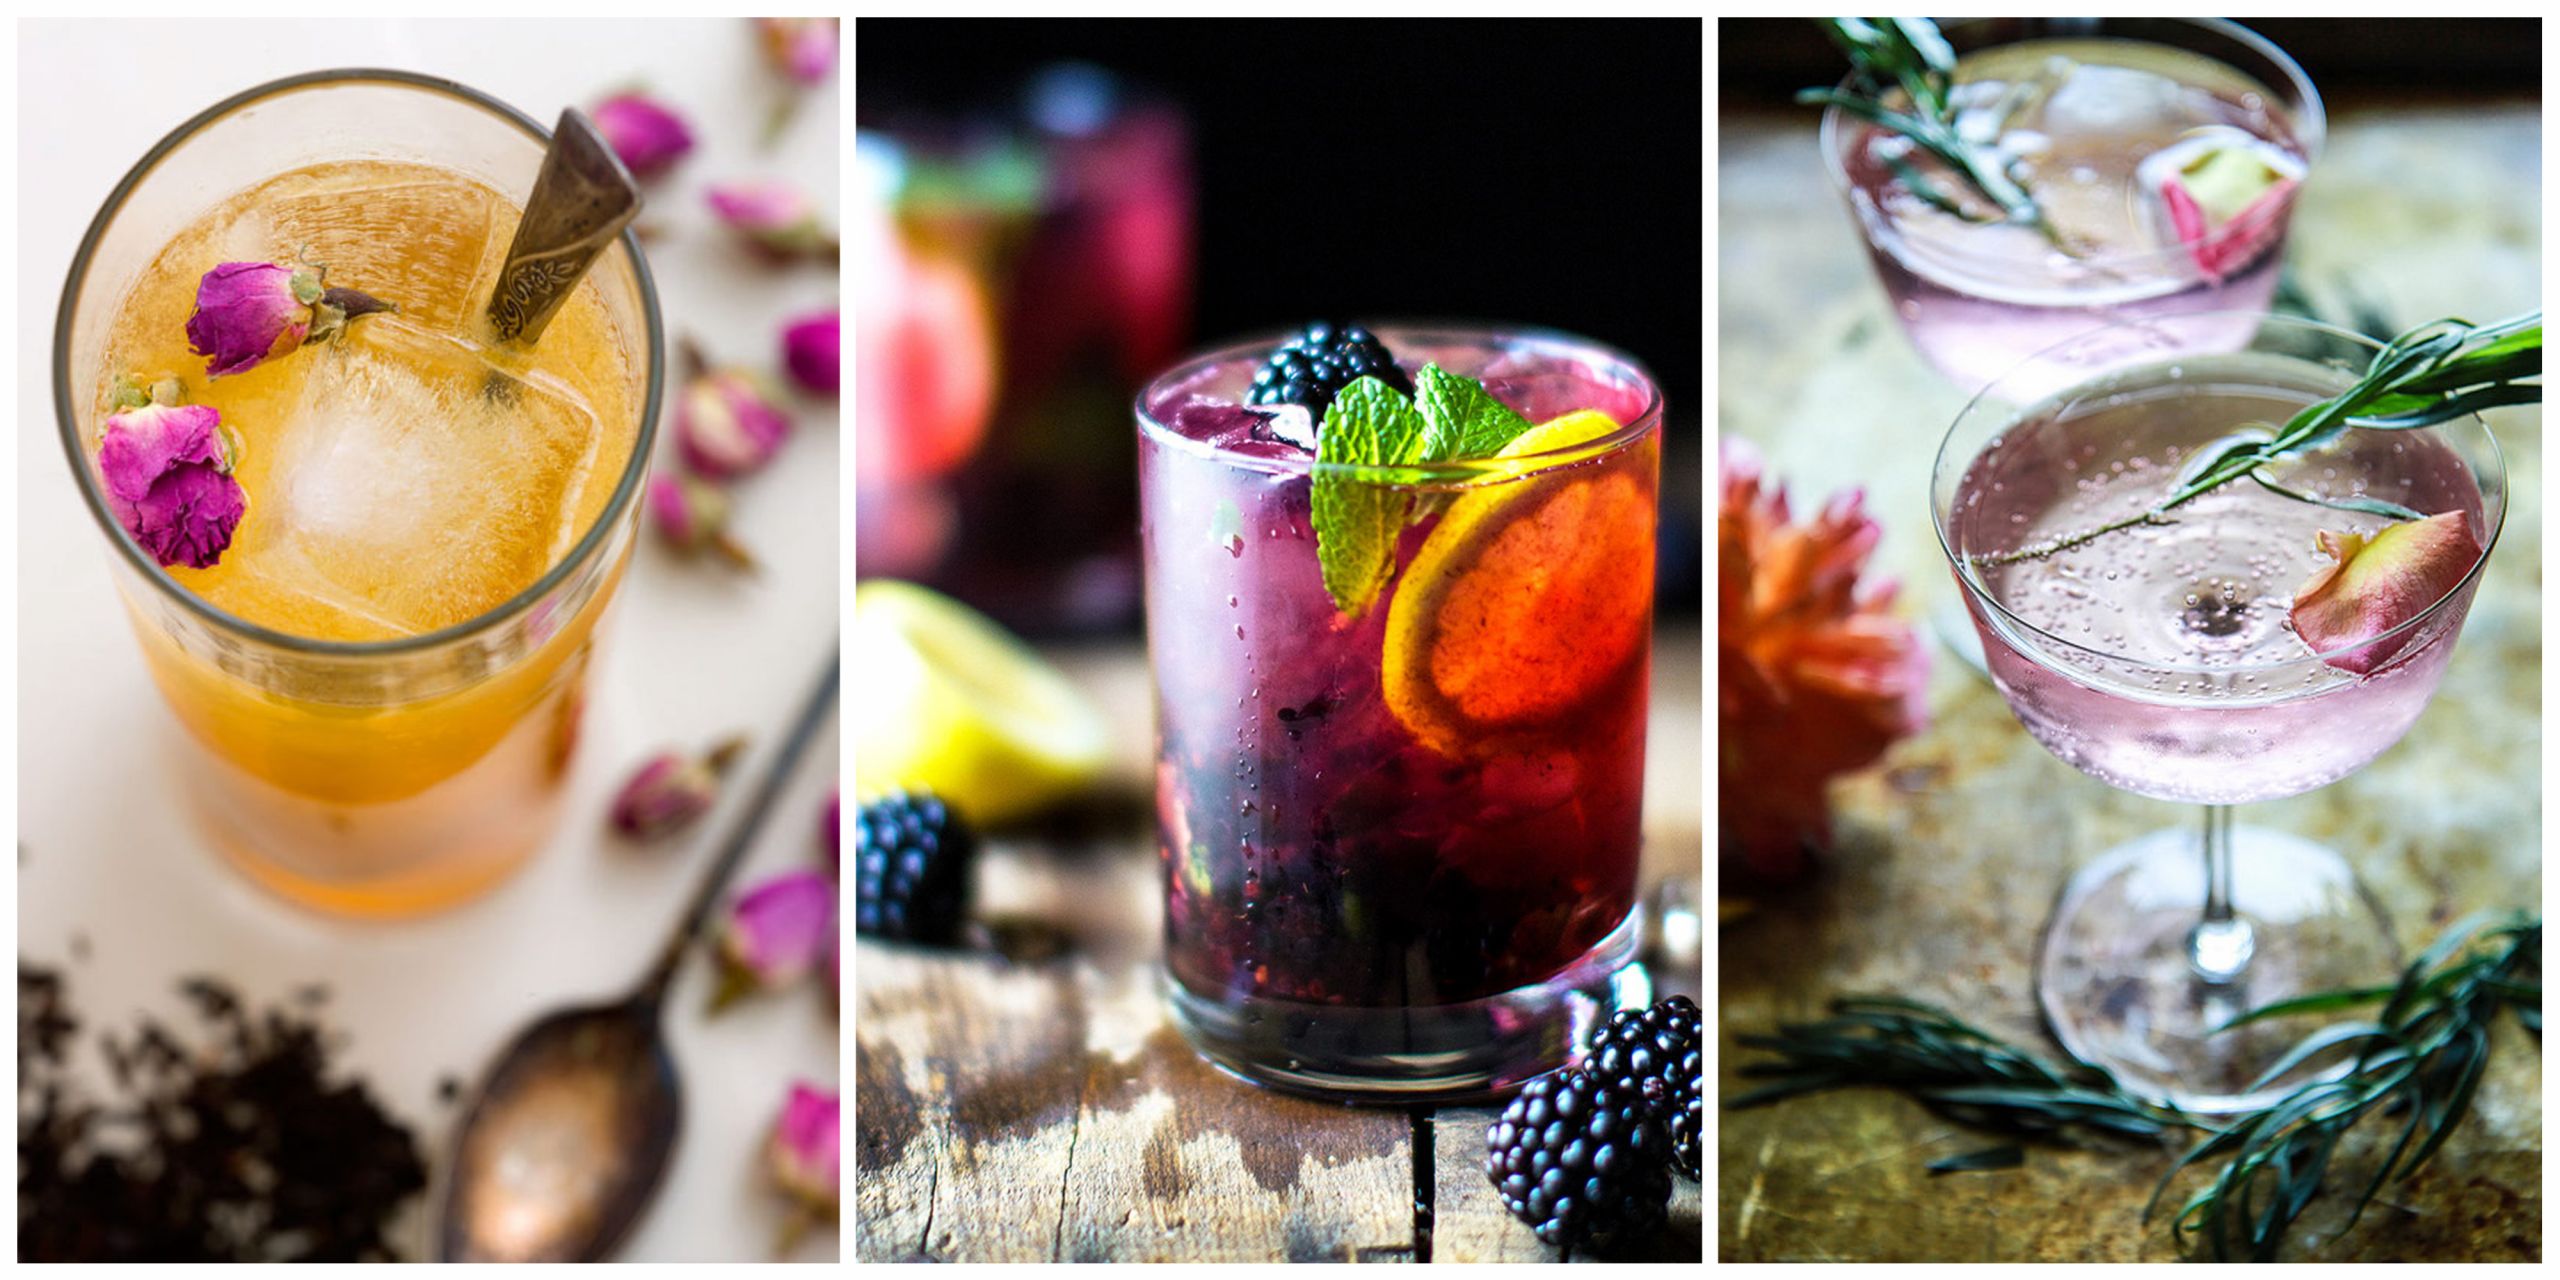 Best Gin Cocktails
 10 Delicious Gin Cocktails Refreshing Gin Drink Recipes